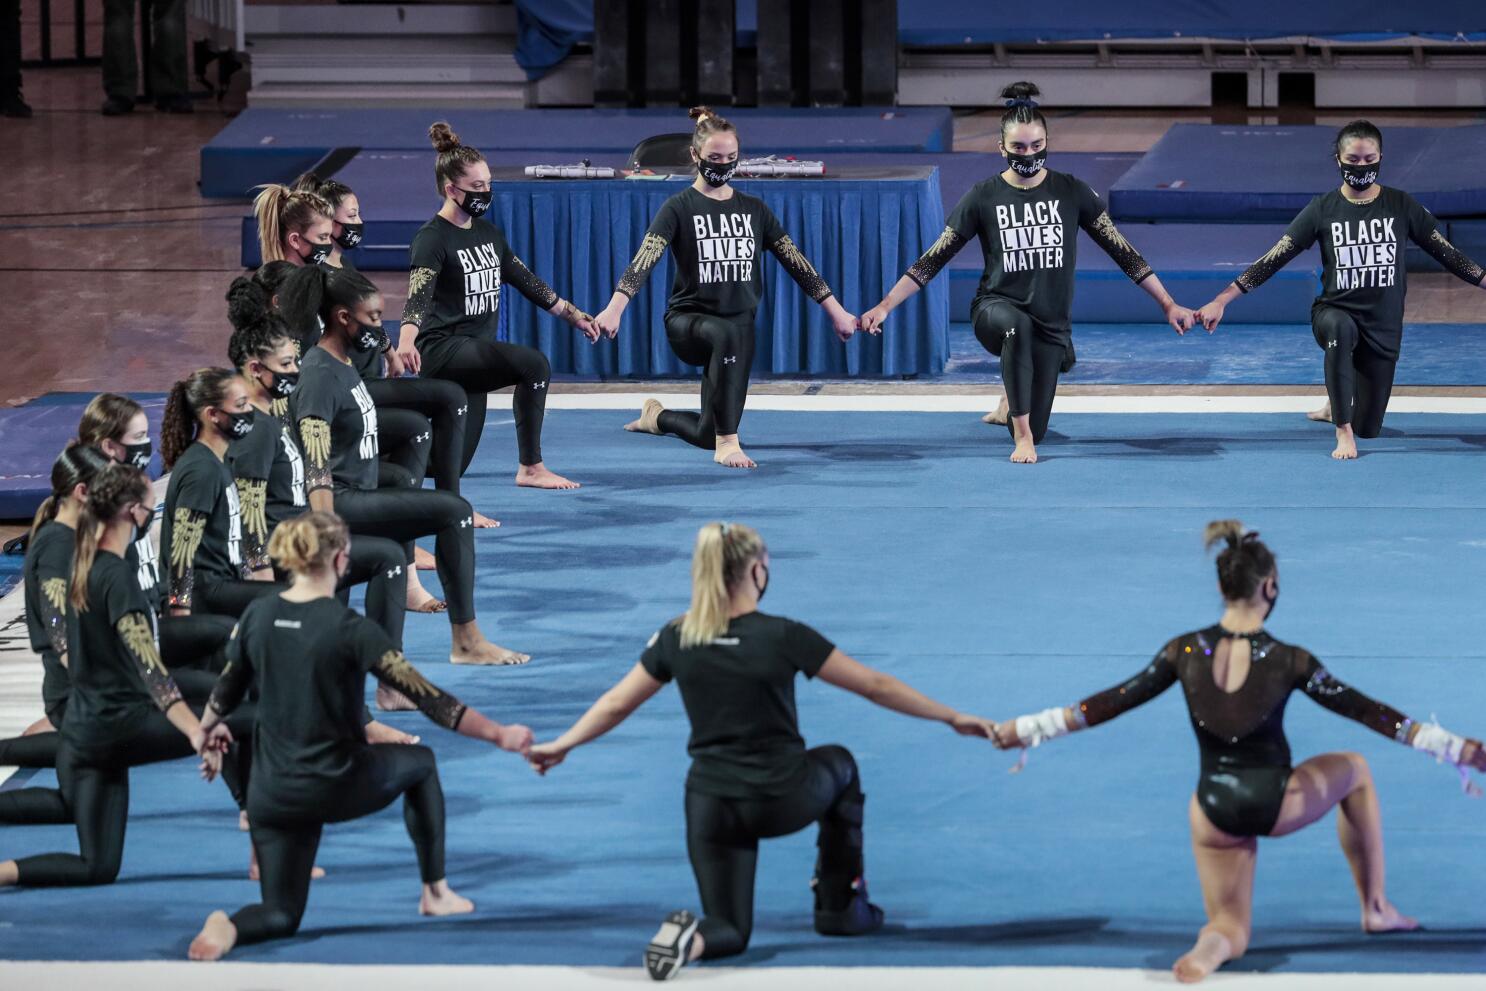 UCLA gymnastics confronts allegations of racism and bullying - Los